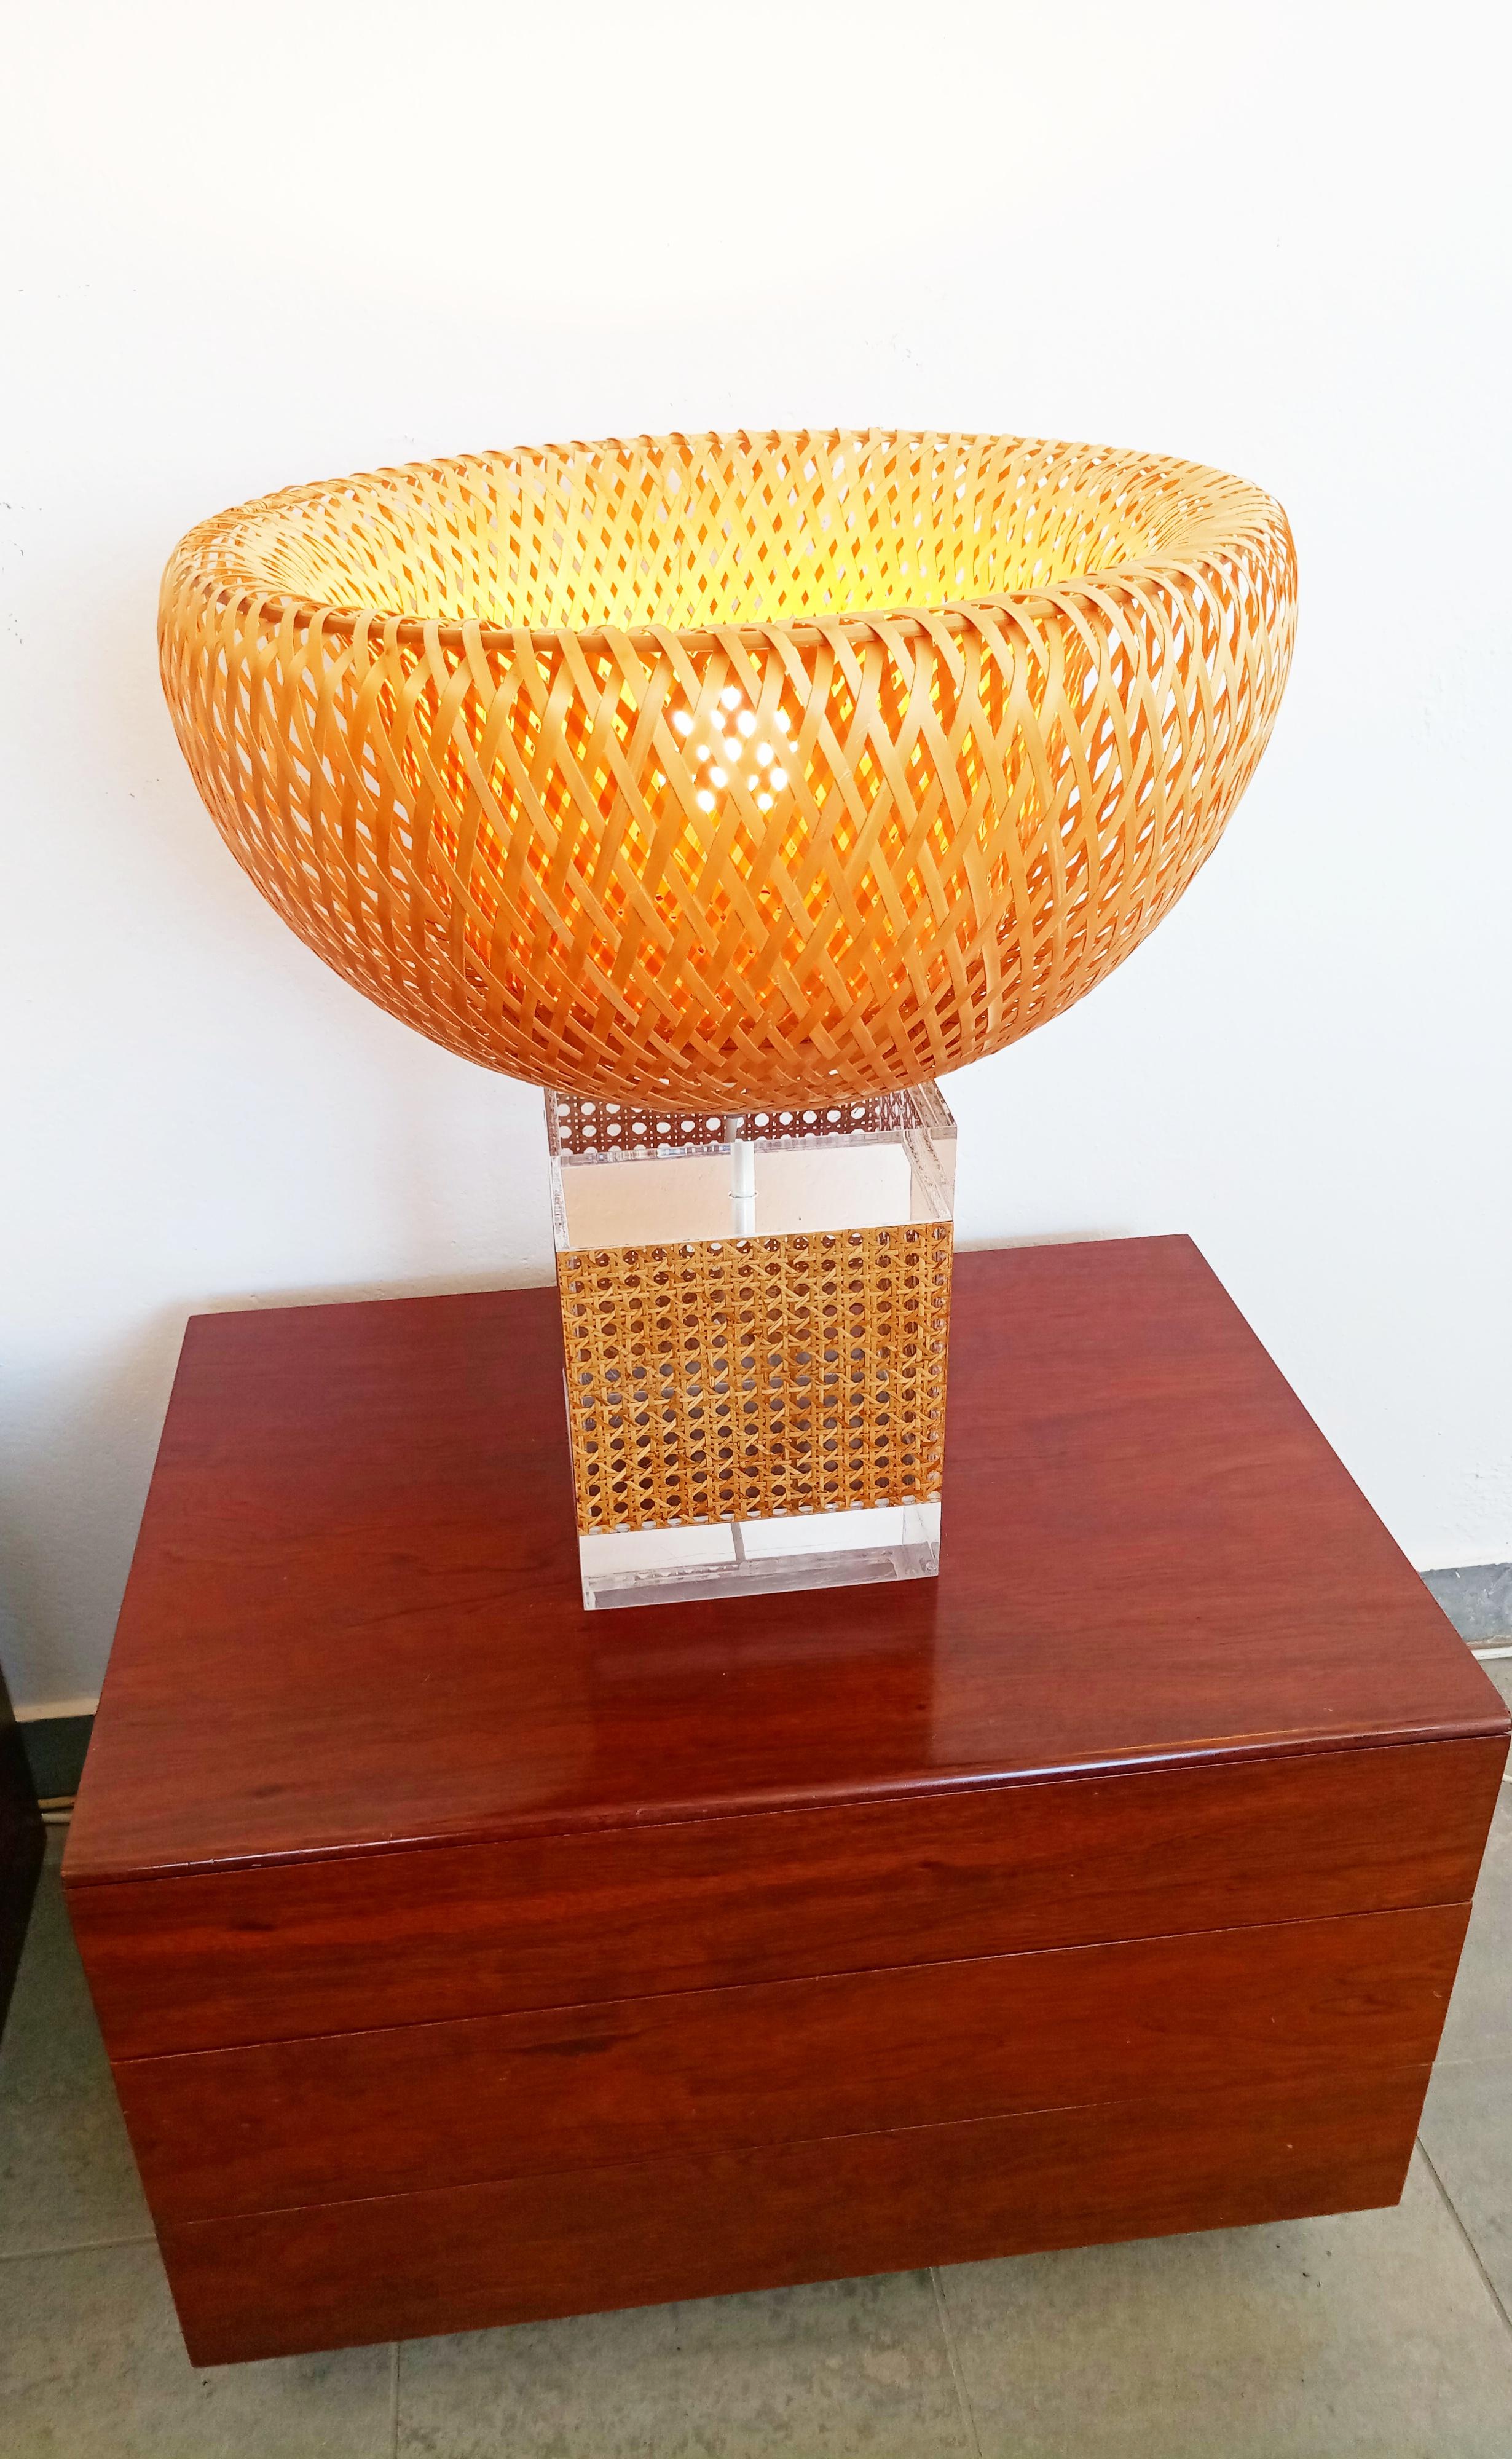 Large Caning and Lucite Table Lamp, France, 1970s For Sale 1